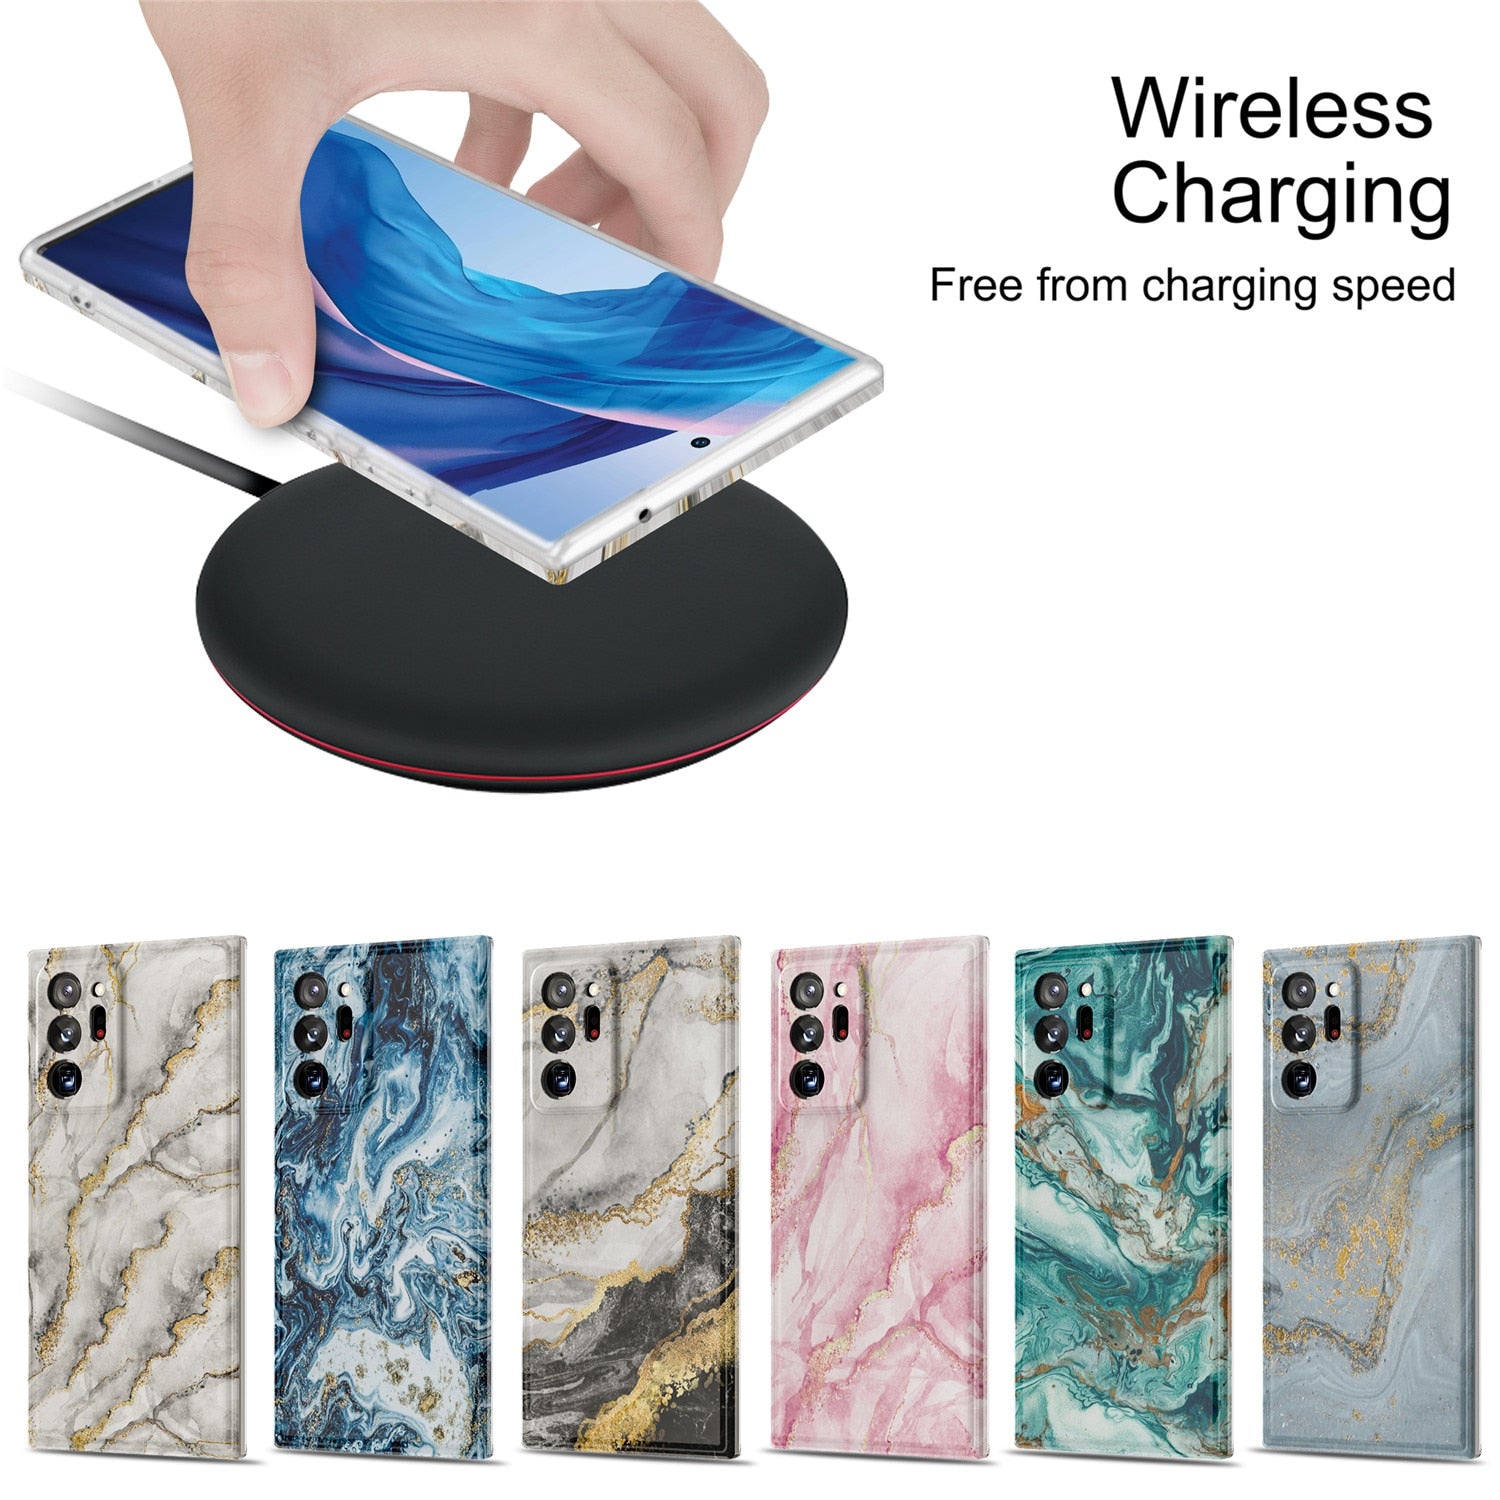 Case for Samsung Galaxy Note 20 Ultra Marble Case,Slim Thin Glossy Soft TPU Rubber Gel Phone Case Cover for Samsung Note 20Ultra - 380230 Find Epic Store